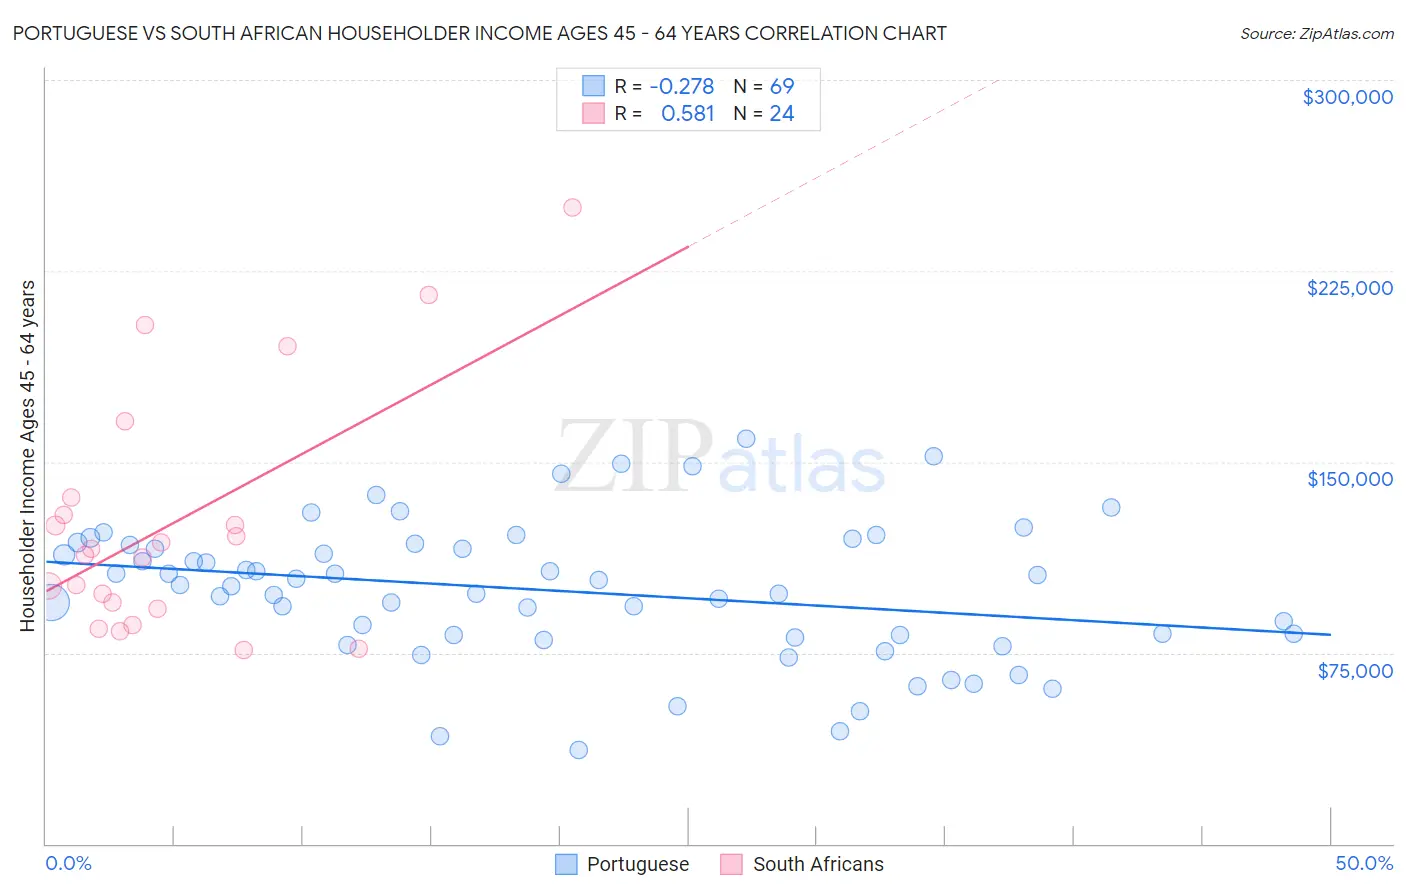 Portuguese vs South African Householder Income Ages 45 - 64 years